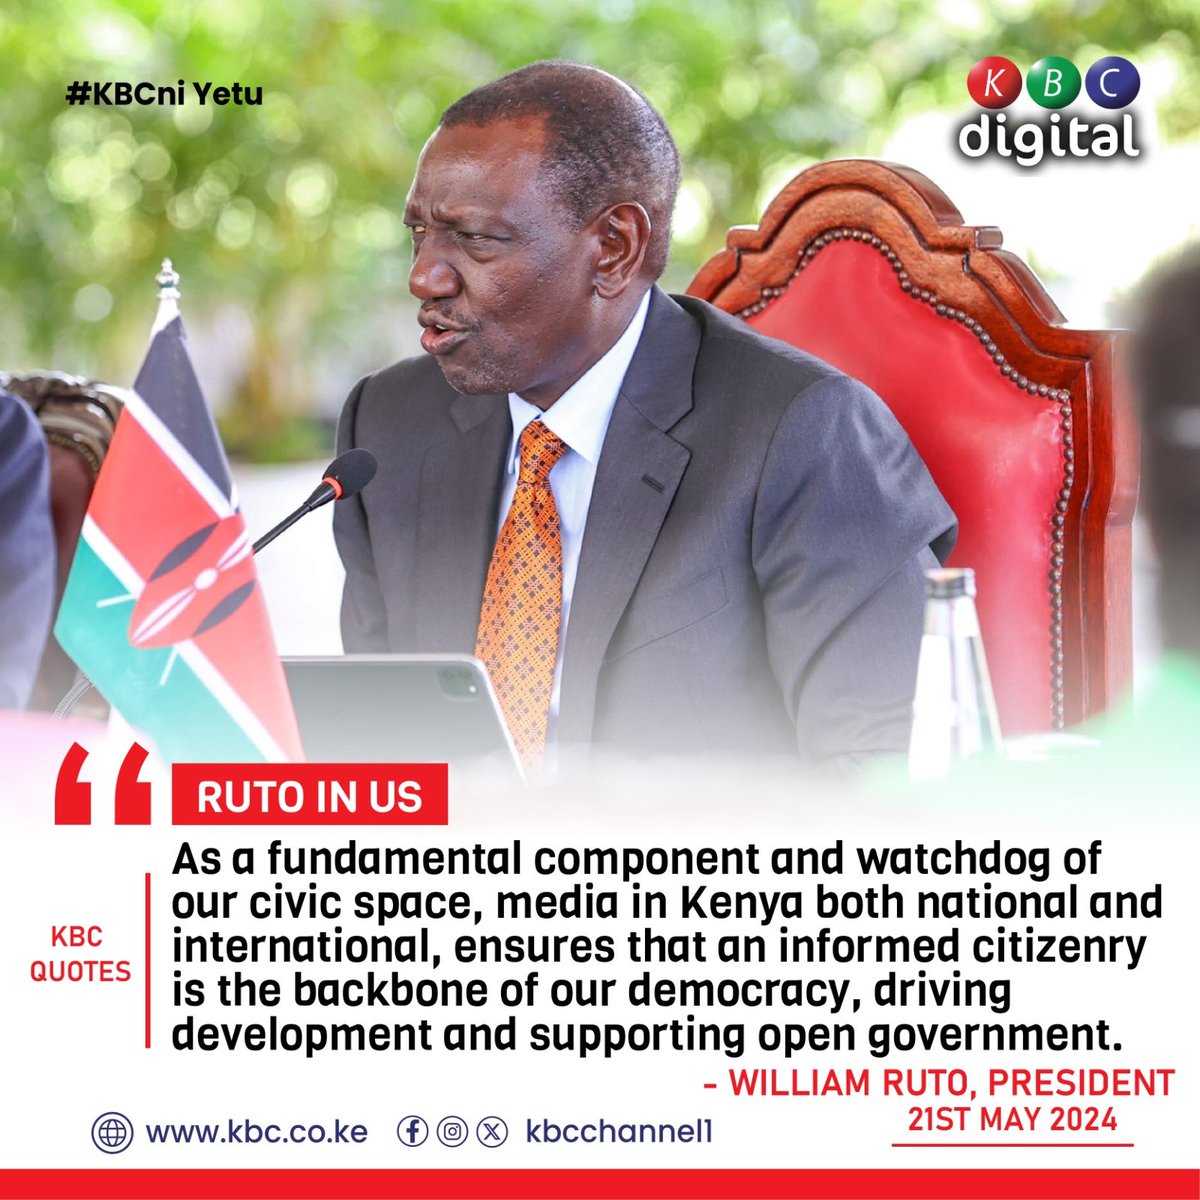 'As a fundamental component and watchdog of our civic space, media in Kenya both national and international, ensures that an informed citizenry is the backbone of our democracy, driving development and supporting open government.' President William Ruto #KBCniYetu ^RO